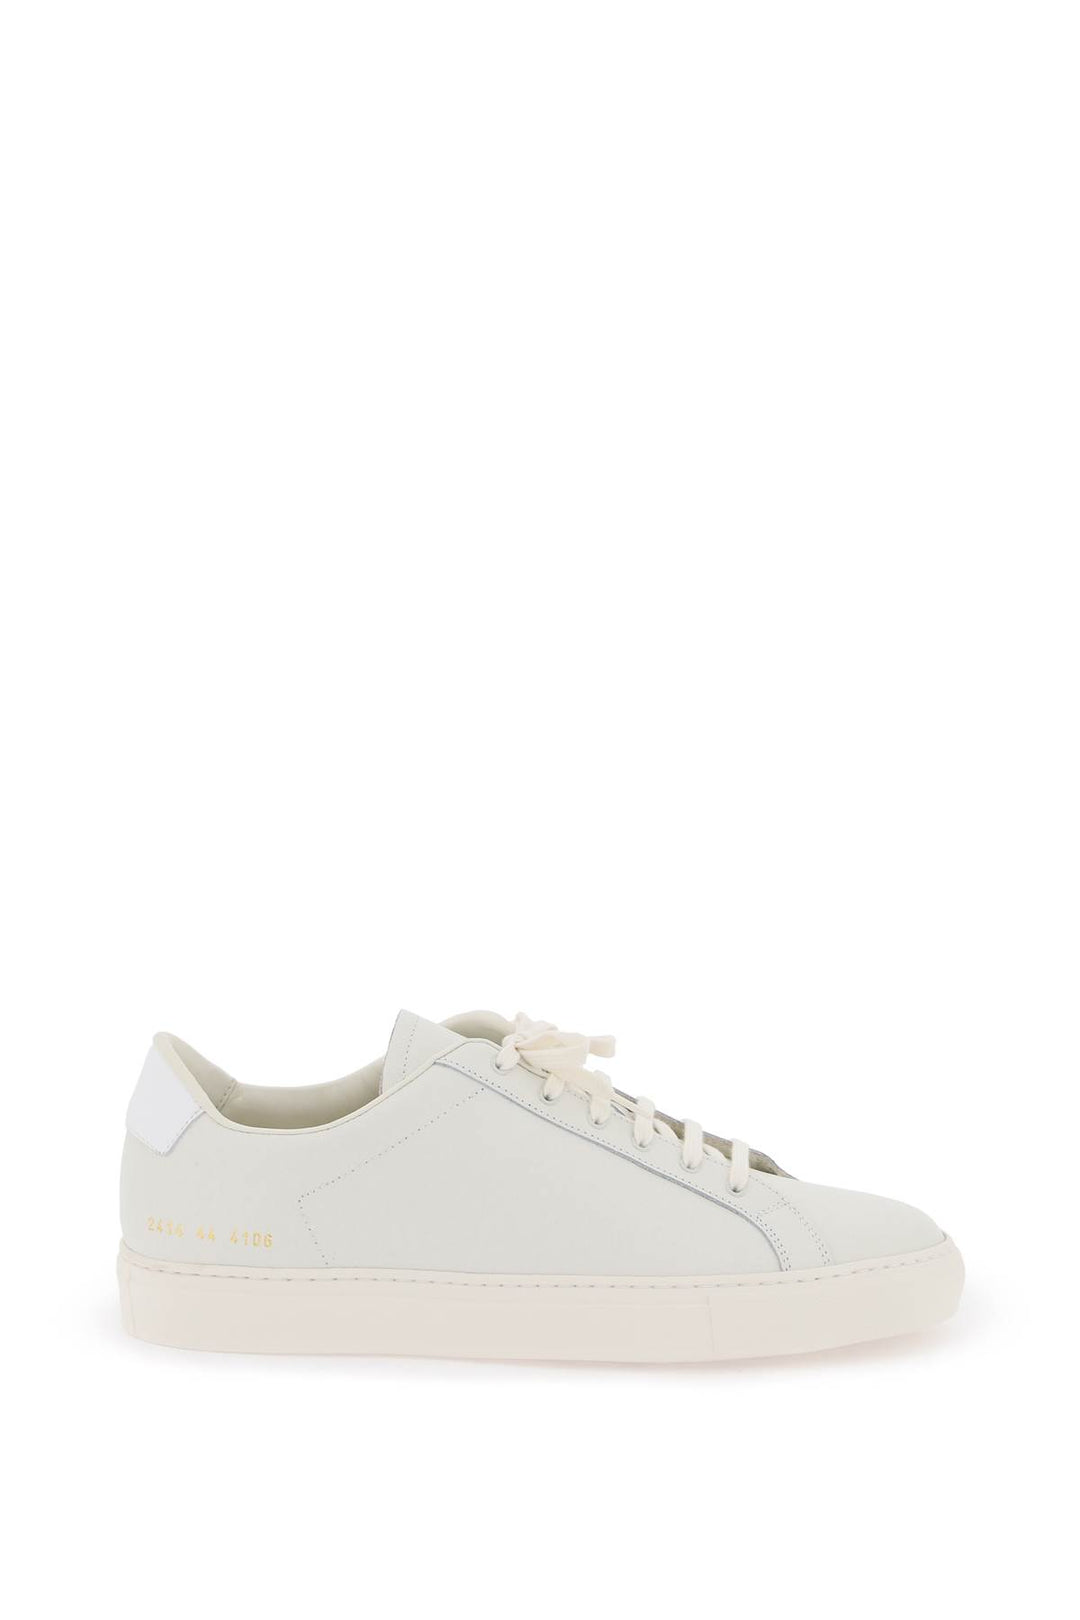 Common Projects Retro Low Top Sne   White